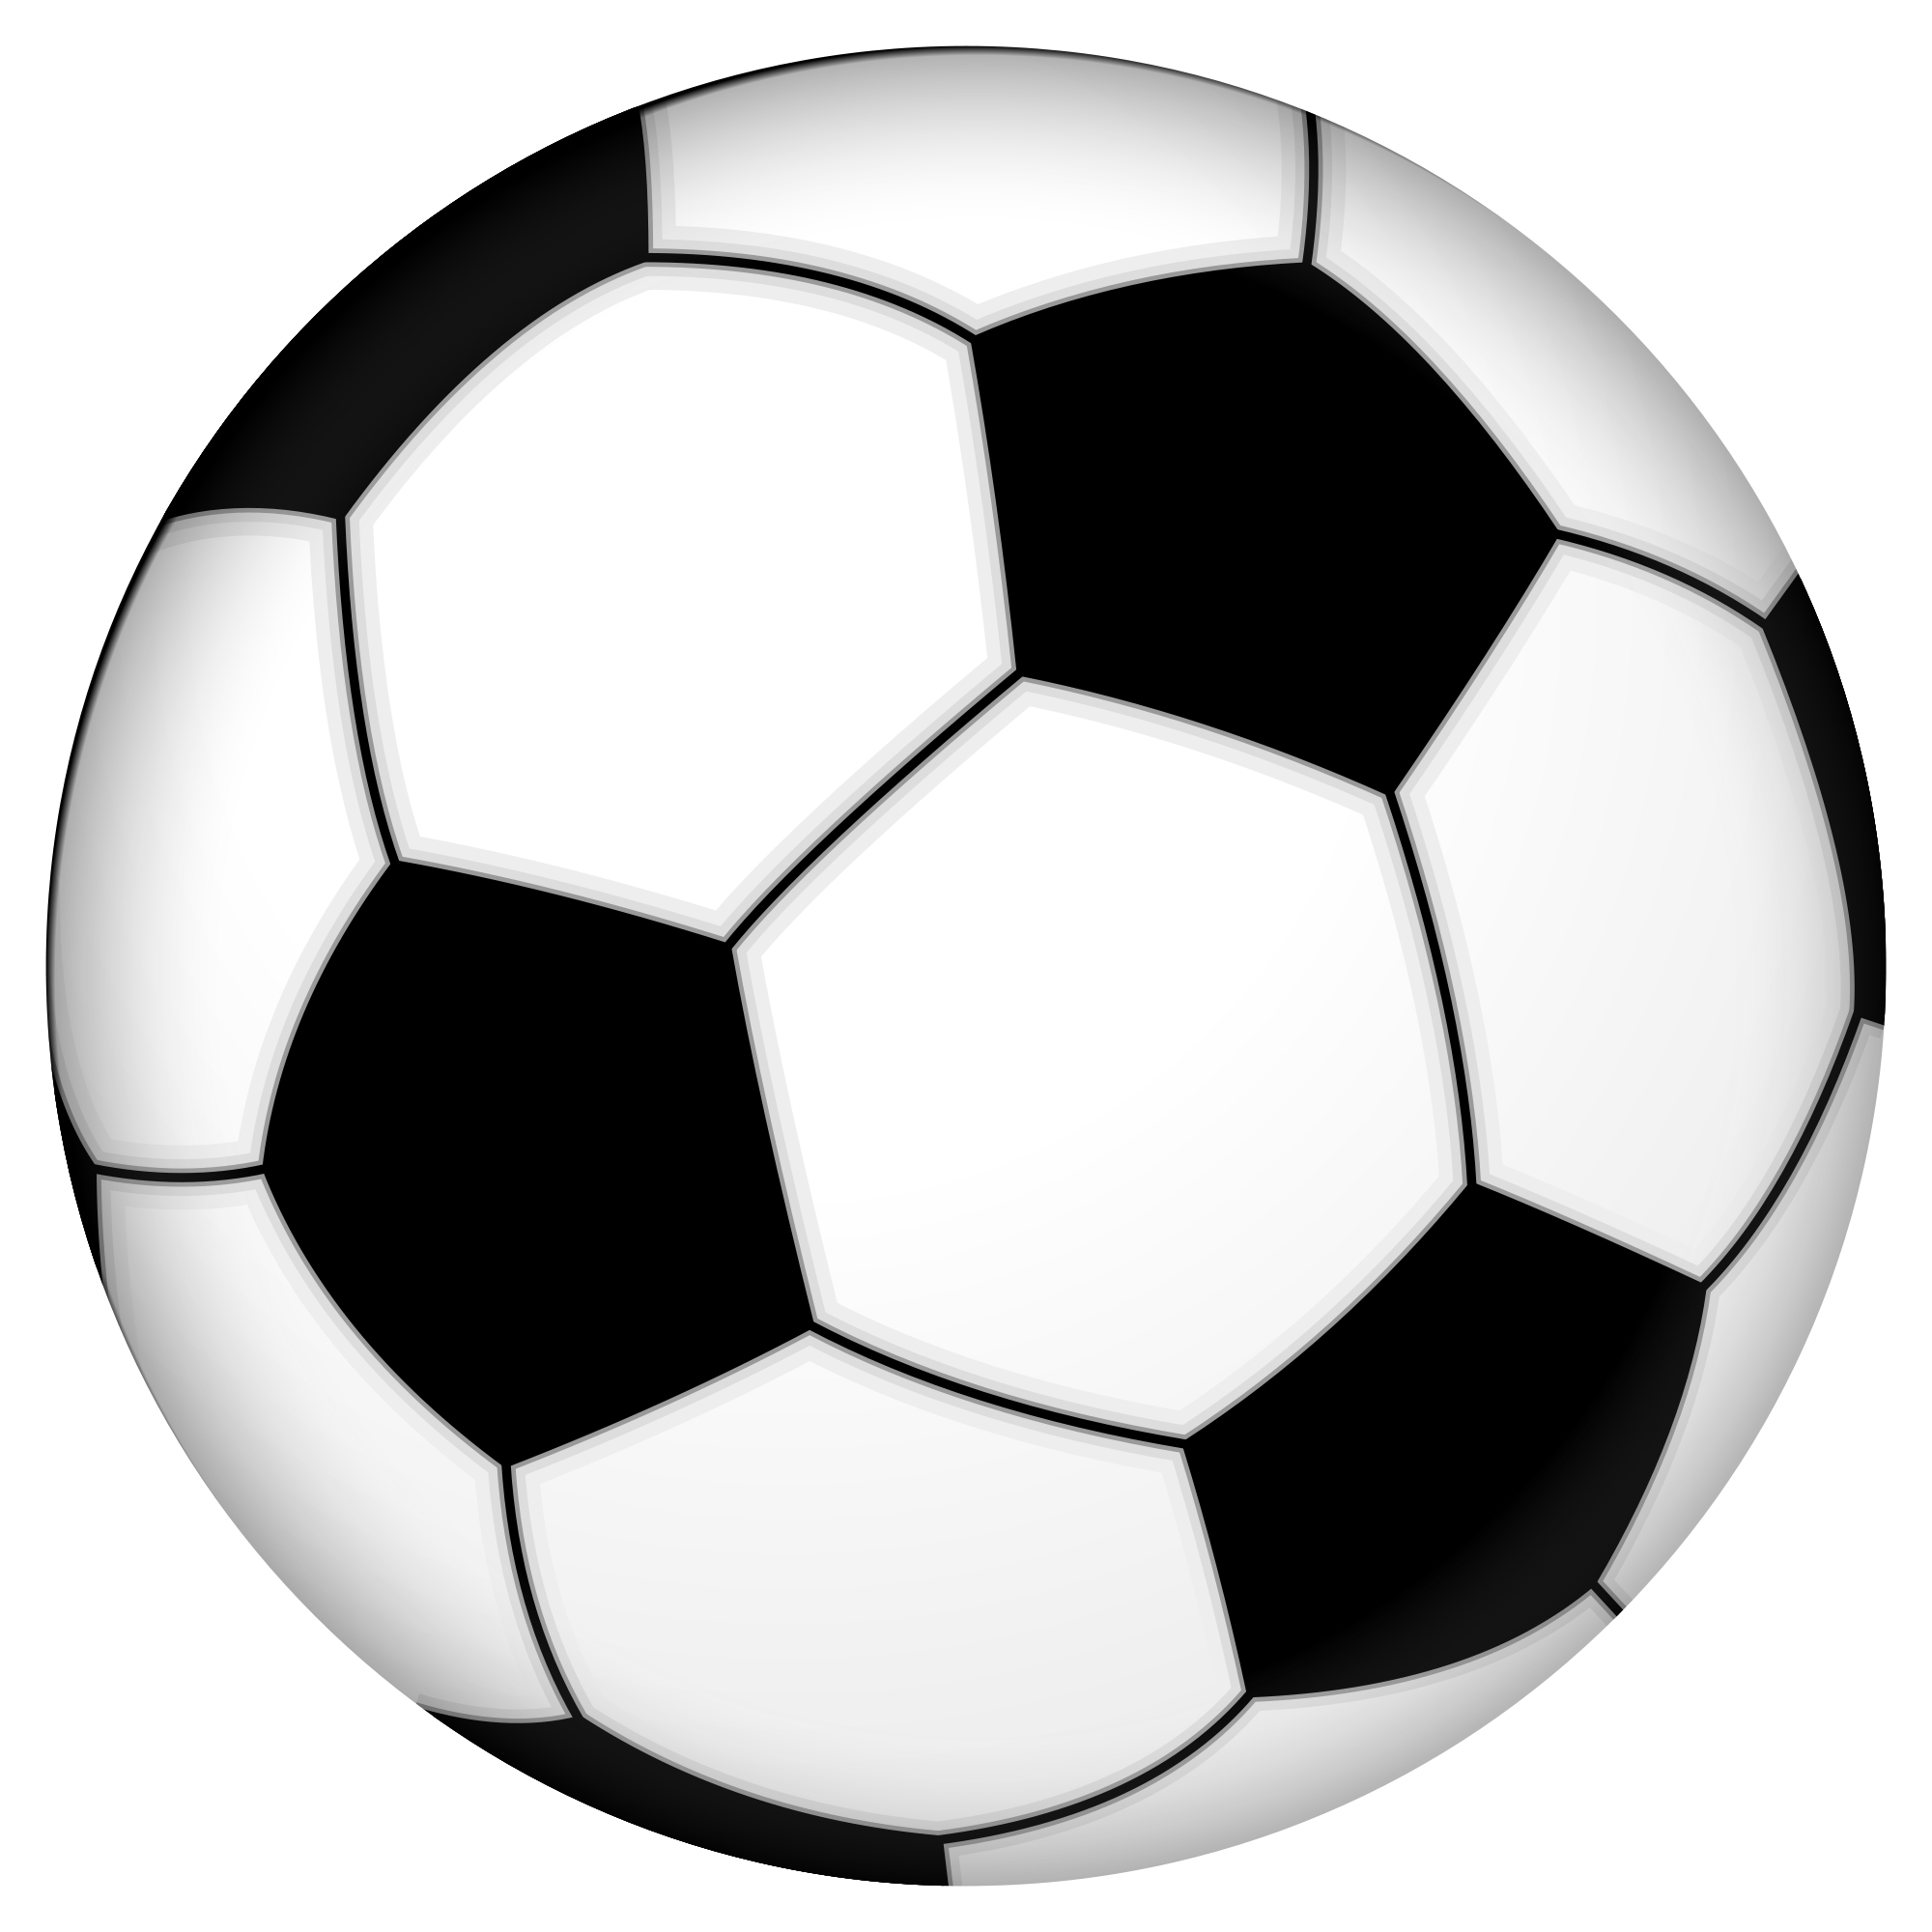 Clip Art Soccer Ball & Clip Art Soccer Ball Clip Art Images.